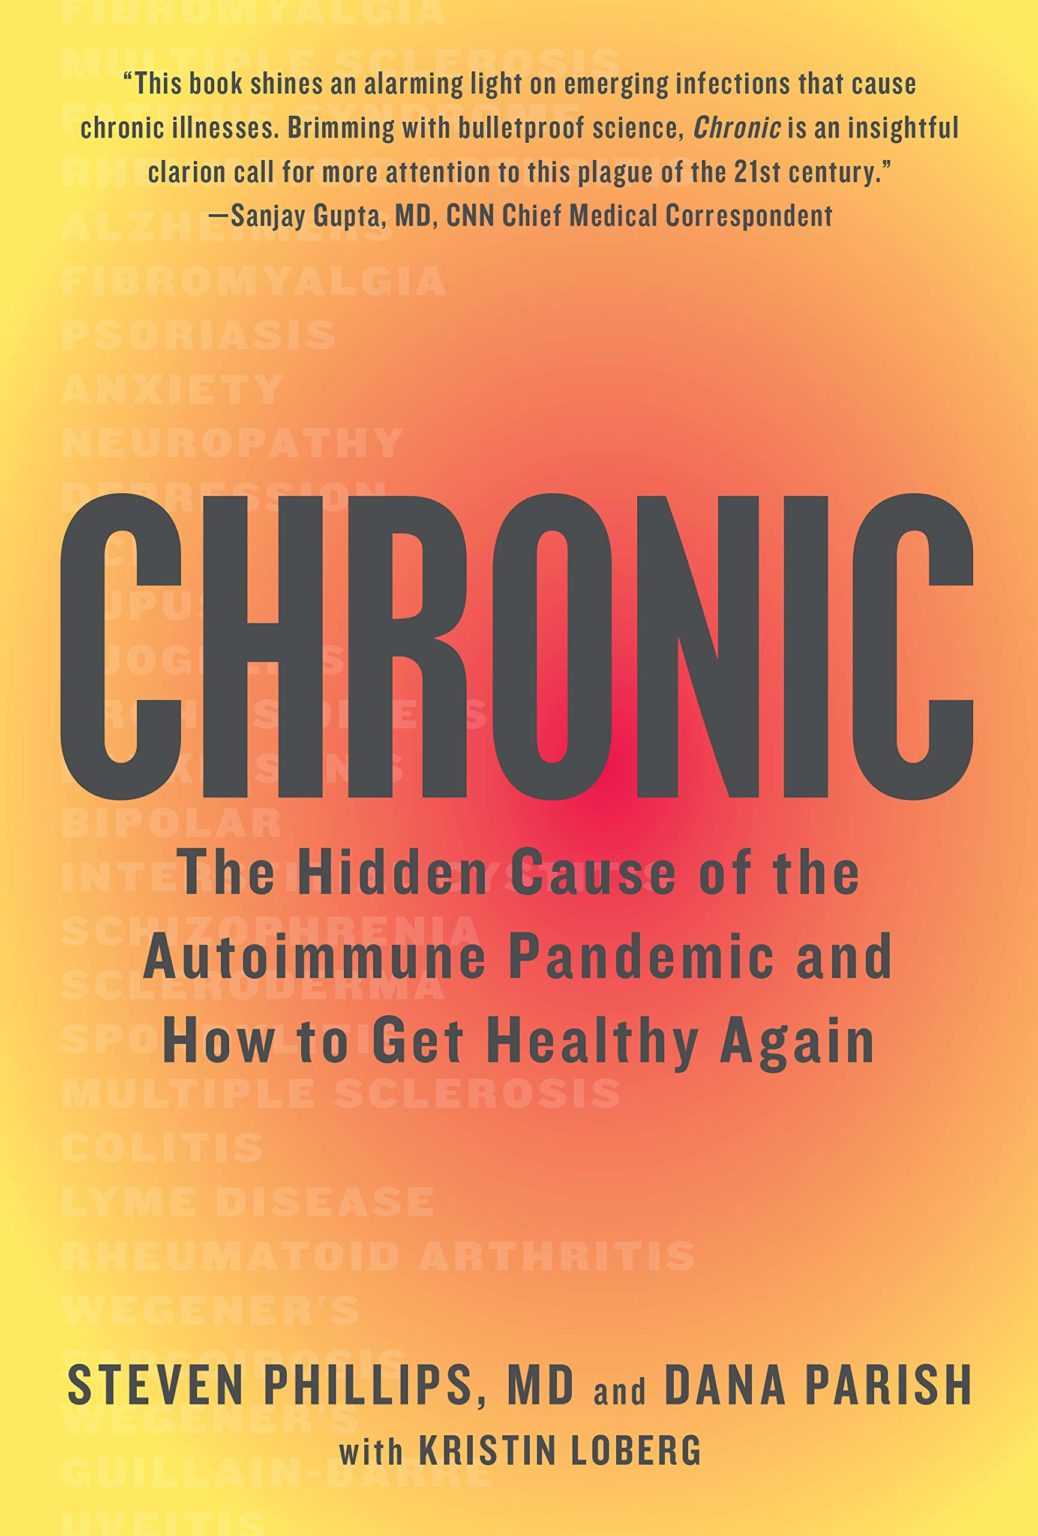 Chronic: The Hidden Cause of the Autoimmune Pandemic and How to Get Healthy Again by Dr. Steven Phillips and Dana Parish.